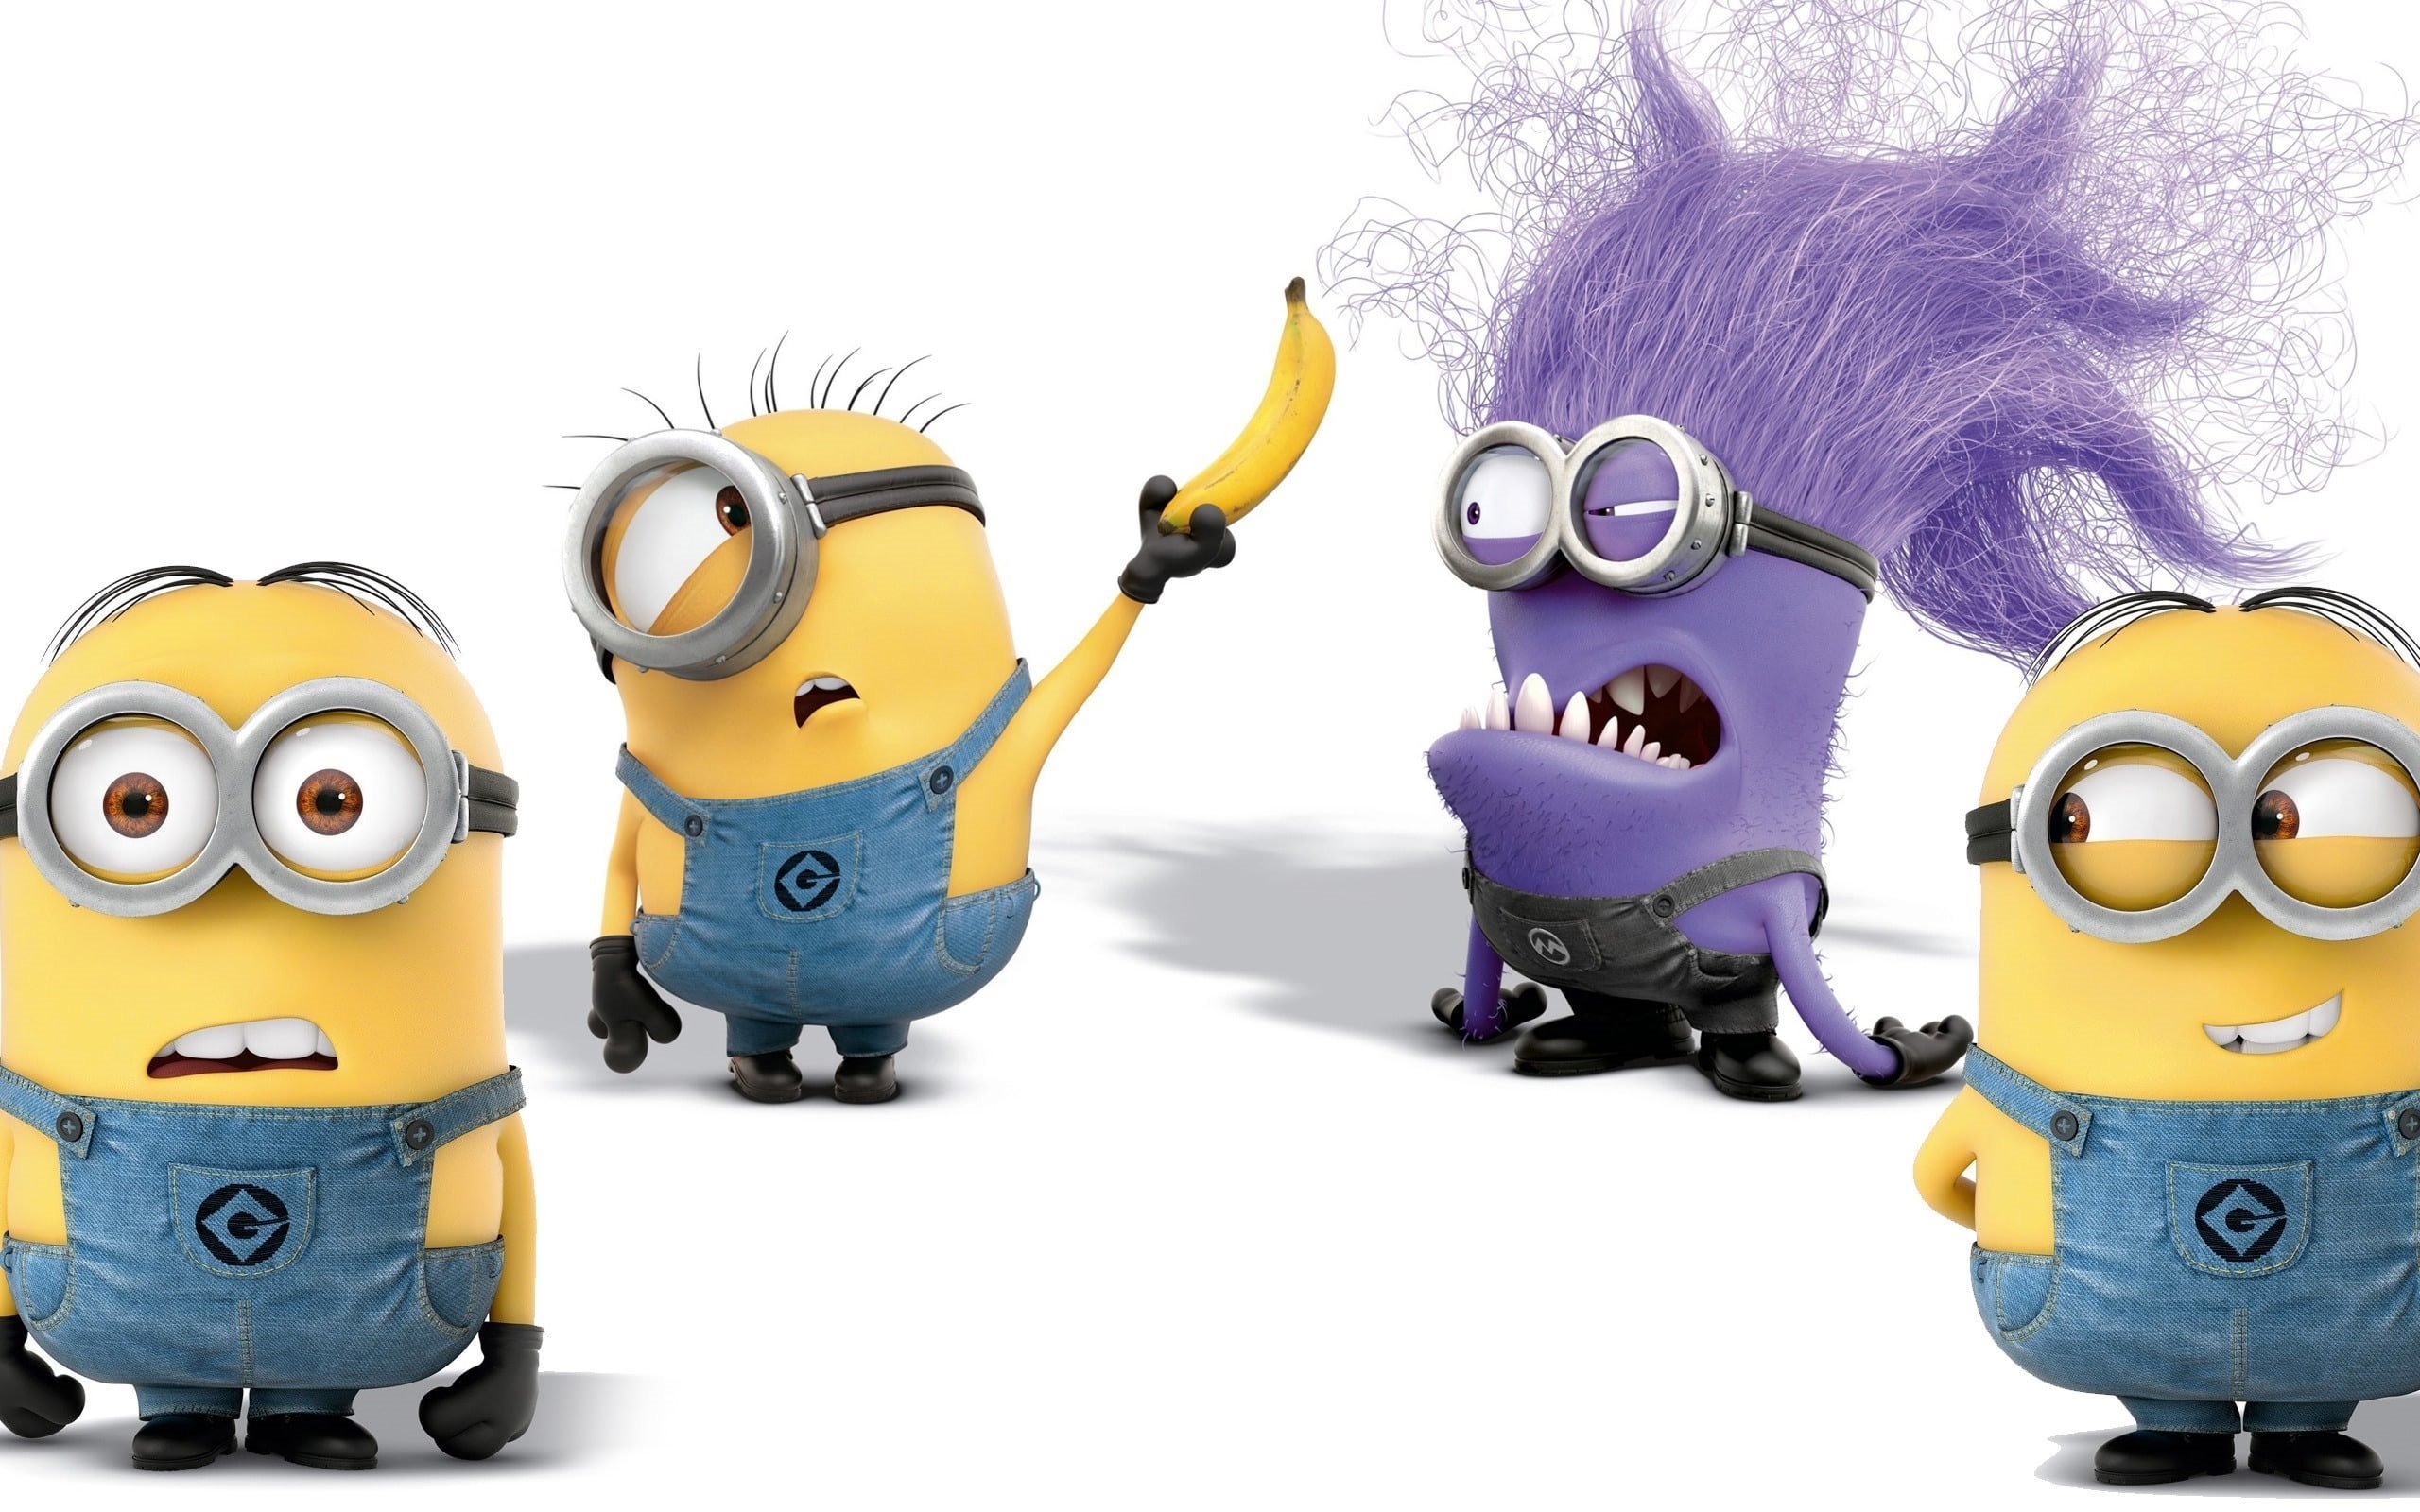 Download wallpaper Minions, Kevin, Bob, Stewart, purple minion, Despicable Me 2 for desktop with resolution 1024x1024. High Quality HD picture wallpaper